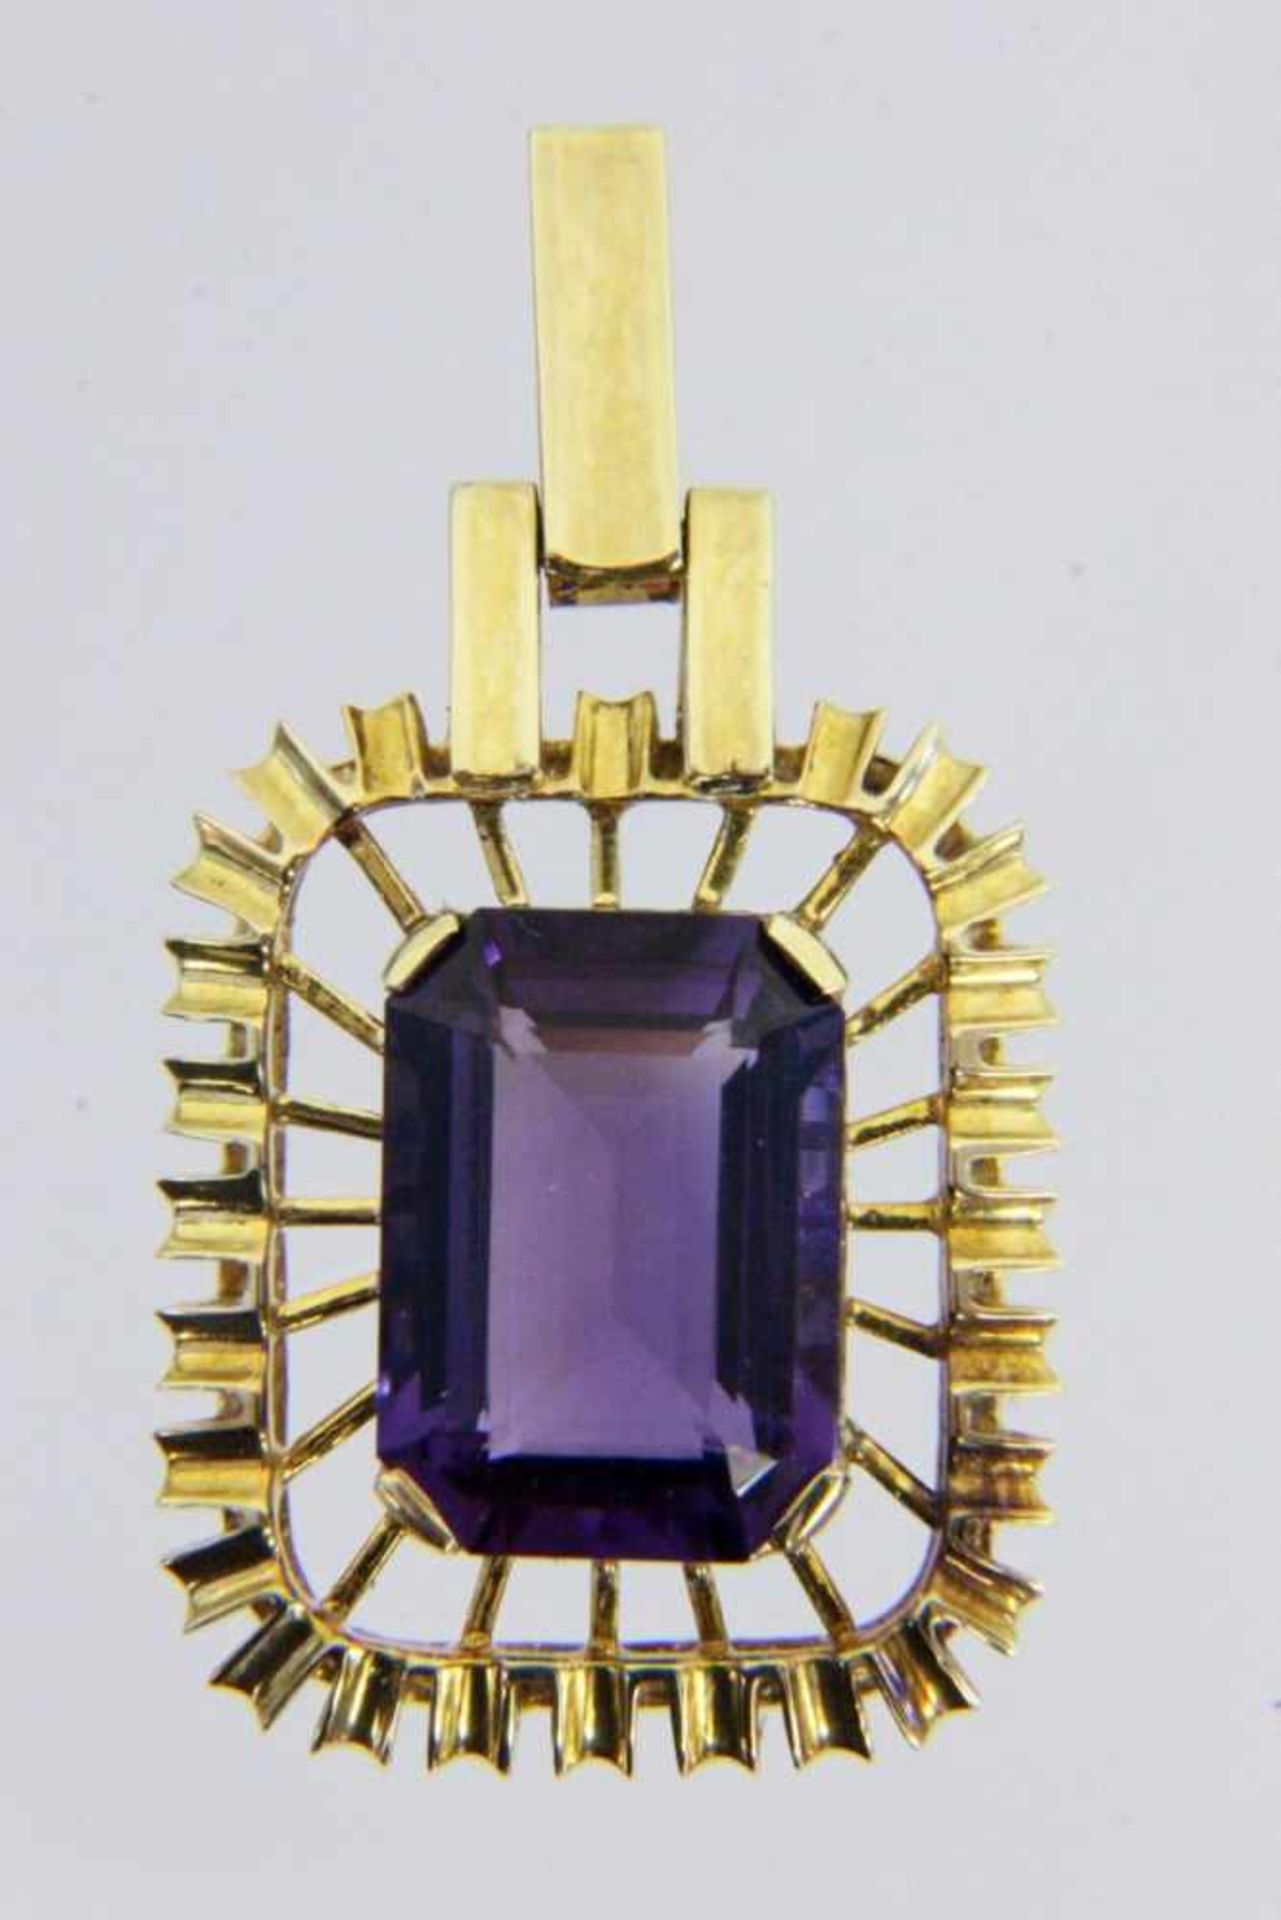 ANHÄNGER585/000 Gelbgold mit Amethyst. L.4,5cm, Brutto ca. 14,1gA PENDANT 585/000 yellow gold with